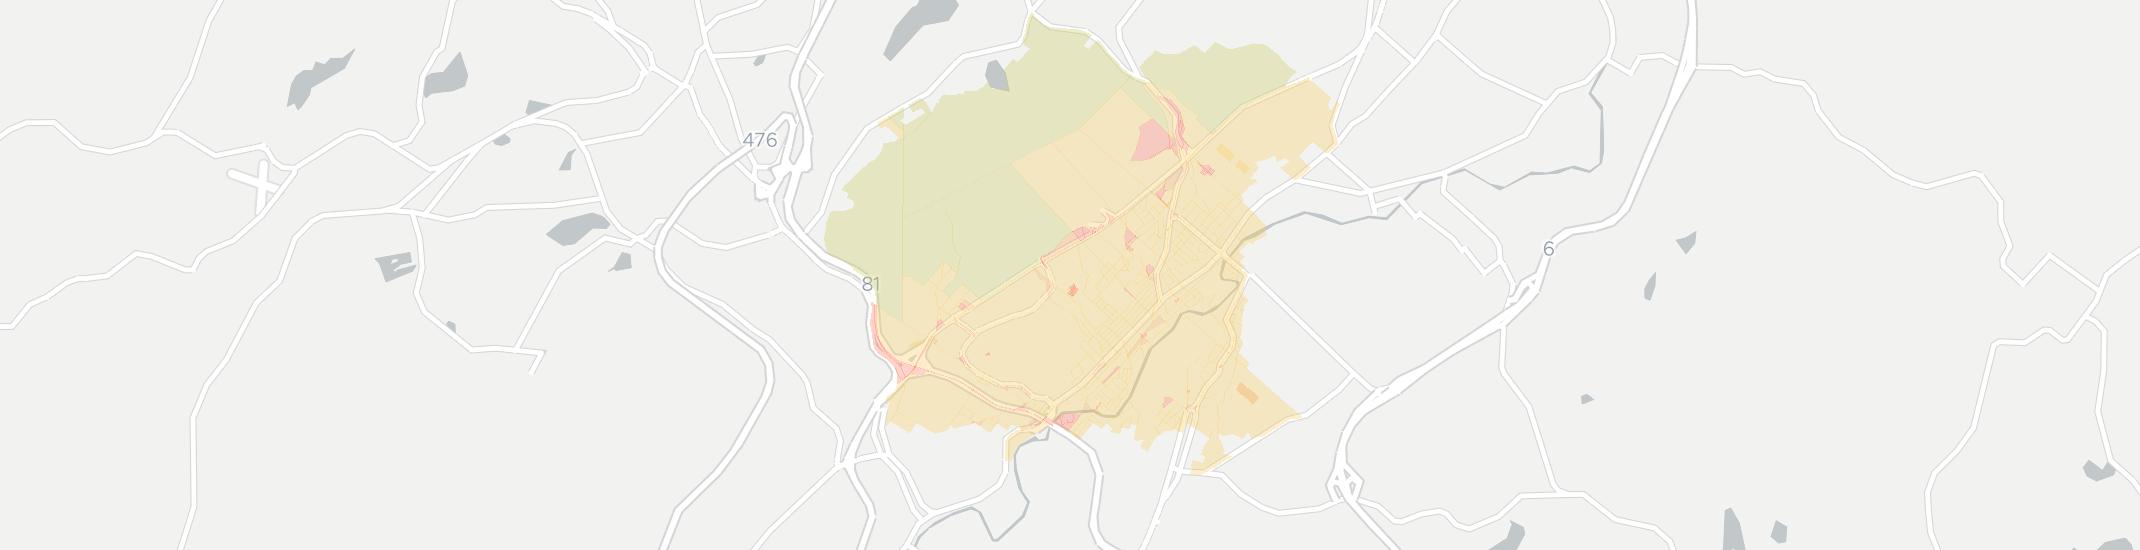 Dickson City Internet Competition Map. Click for interactive map